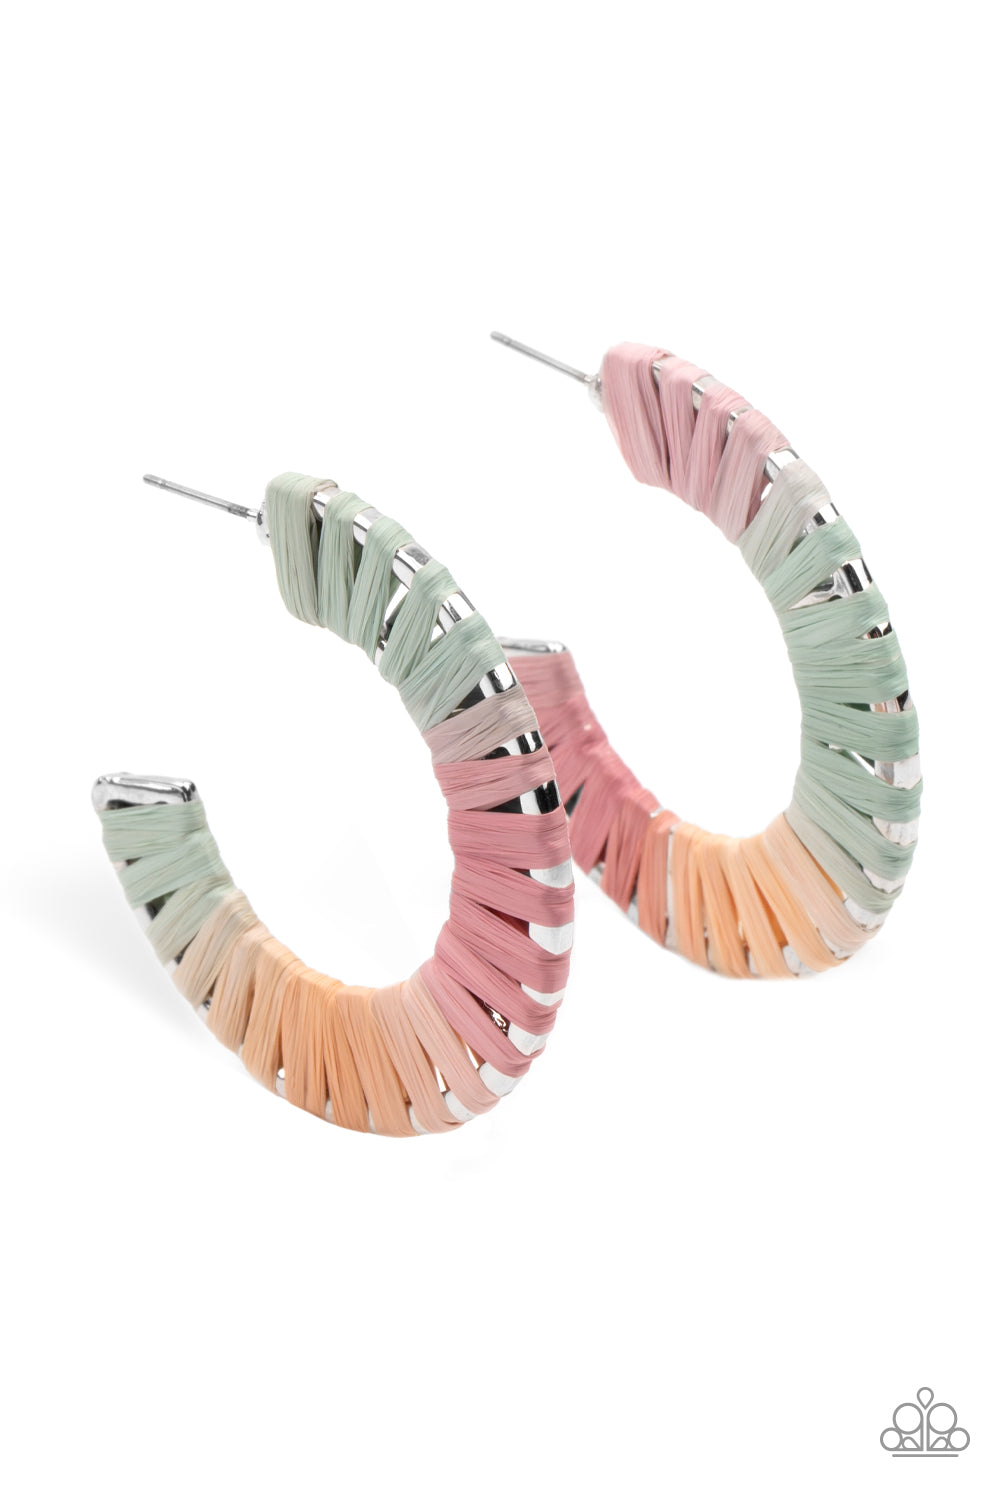 A Chance of RAINBOWS Multi Hoop Earring - Paparazzi Accessories. Multicolored wicker-like cording wraps around a thick silver hoop, creating a flirty pop of color. Earring attaches to a standard post fitting. Hoop measures approximately 1 1/2" in diameter.  All Paparazzi Accessories are lead free and nickel free!  Sold as one pair of hoop earrings.